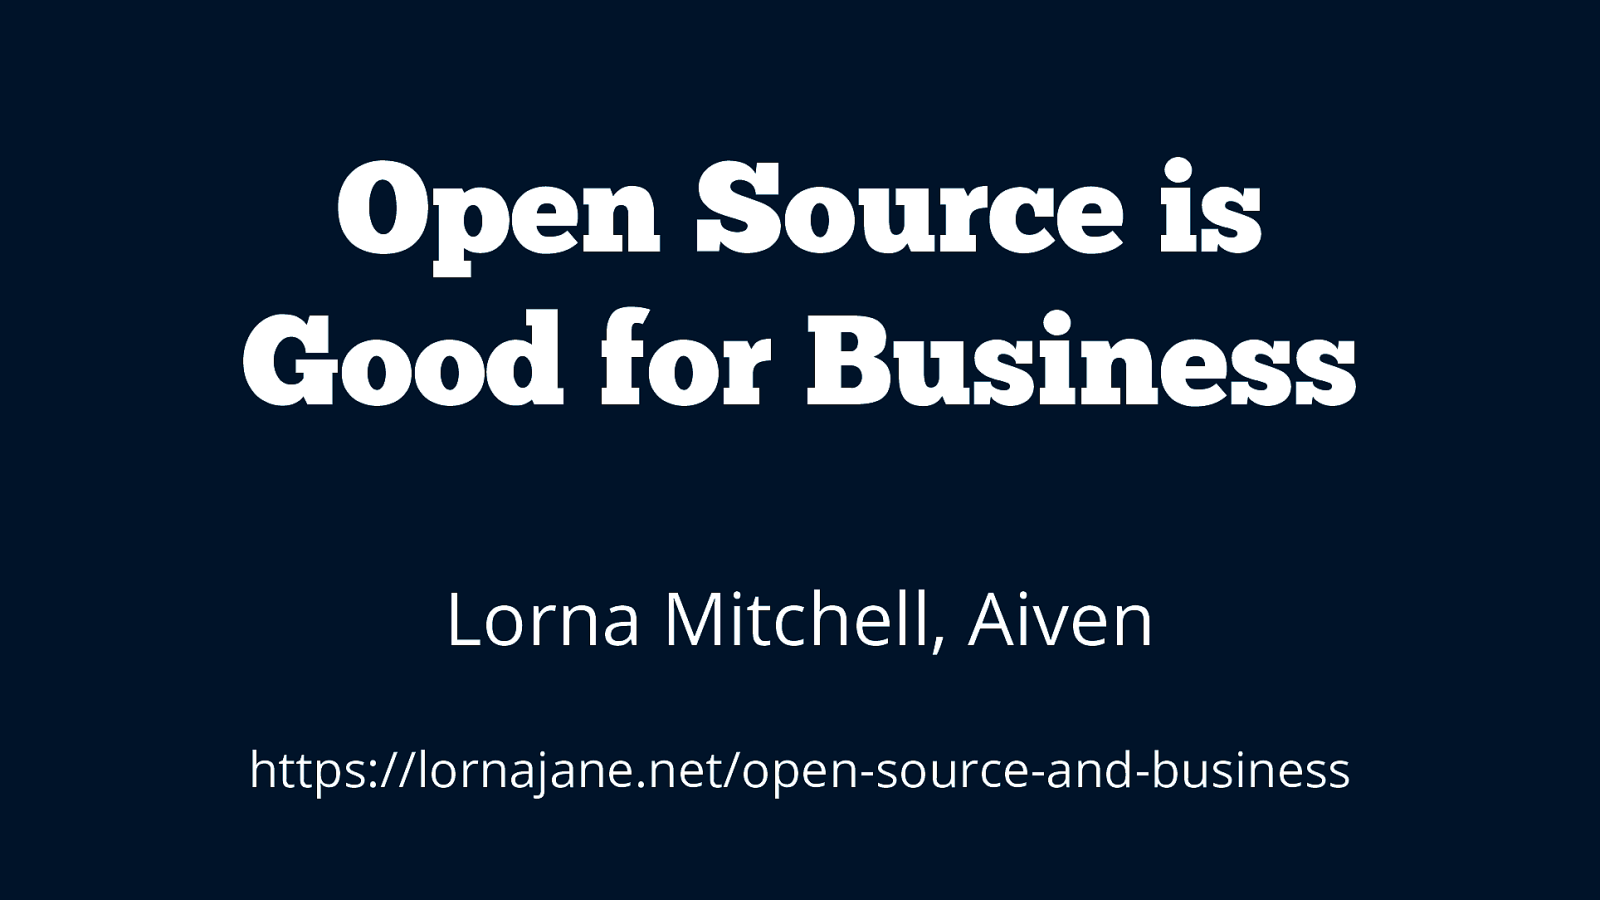 Open source is good for business